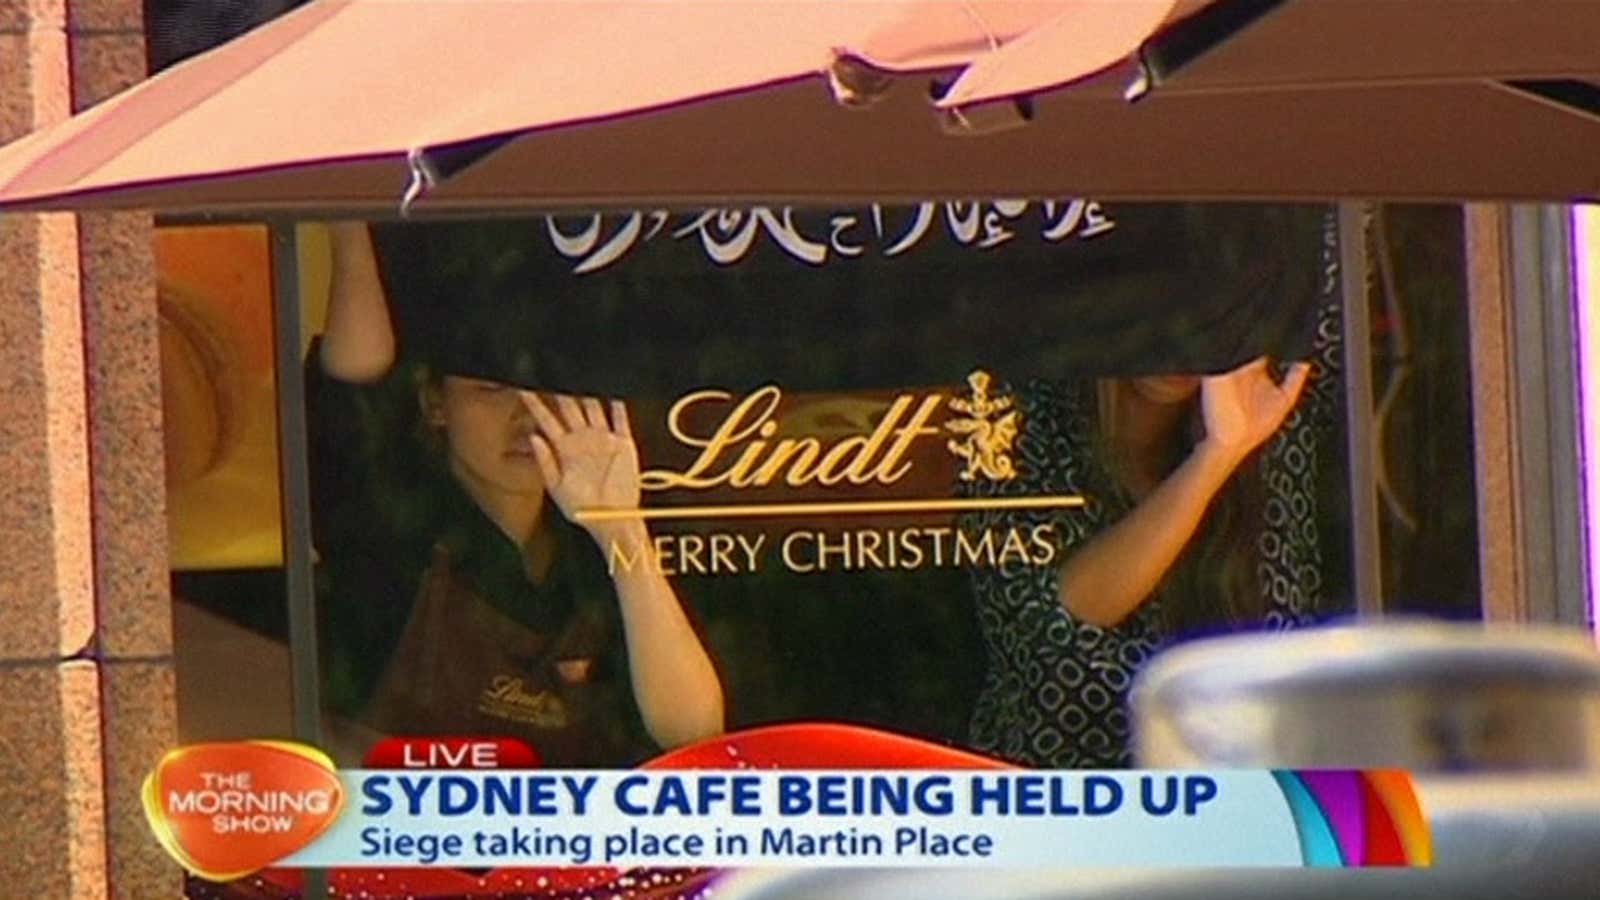 People holding up what appeared to be a black flag with white Arabic writing on it, inside a cafe in Sydney, Australia.